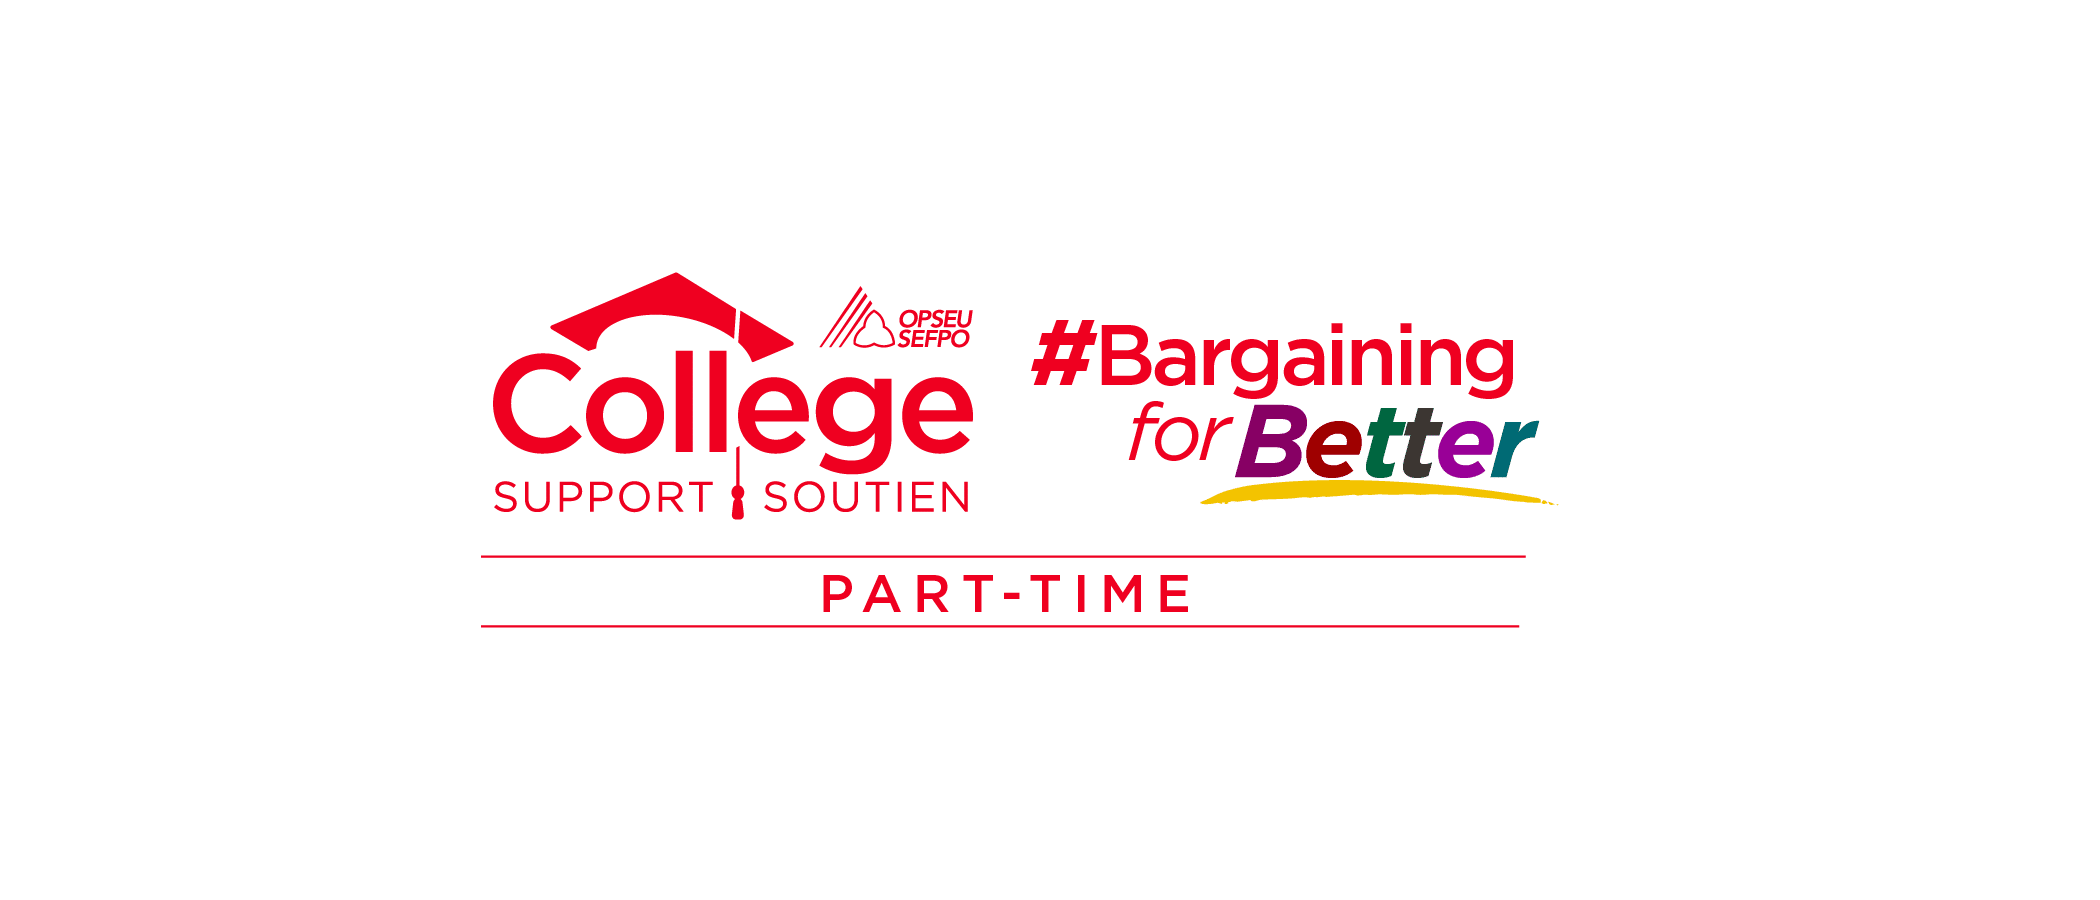 Part-Time College Support Logo. Bargaining for Better